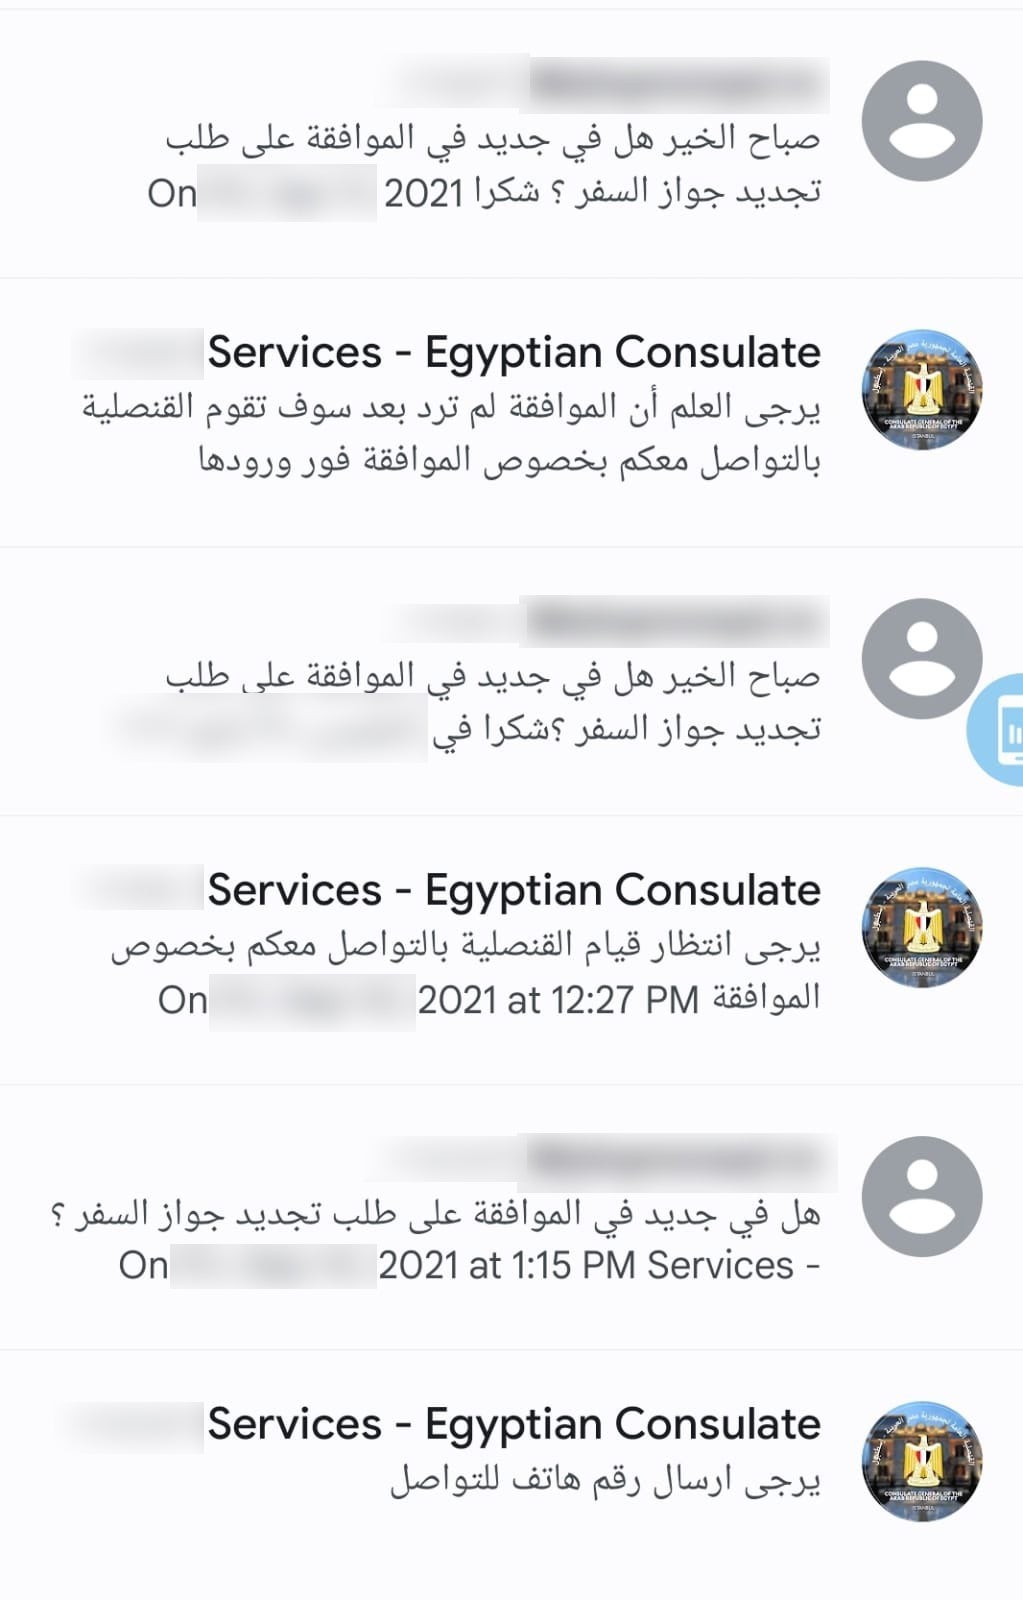 Redacted correspondence between the Egyptian Consulate in Istanbul, Turkey and applicants who have been waiting for months without an answer. The consulate sends the automatic answer: “Please wait until the consulate gets in touch when approval [from Egypt] is received.”